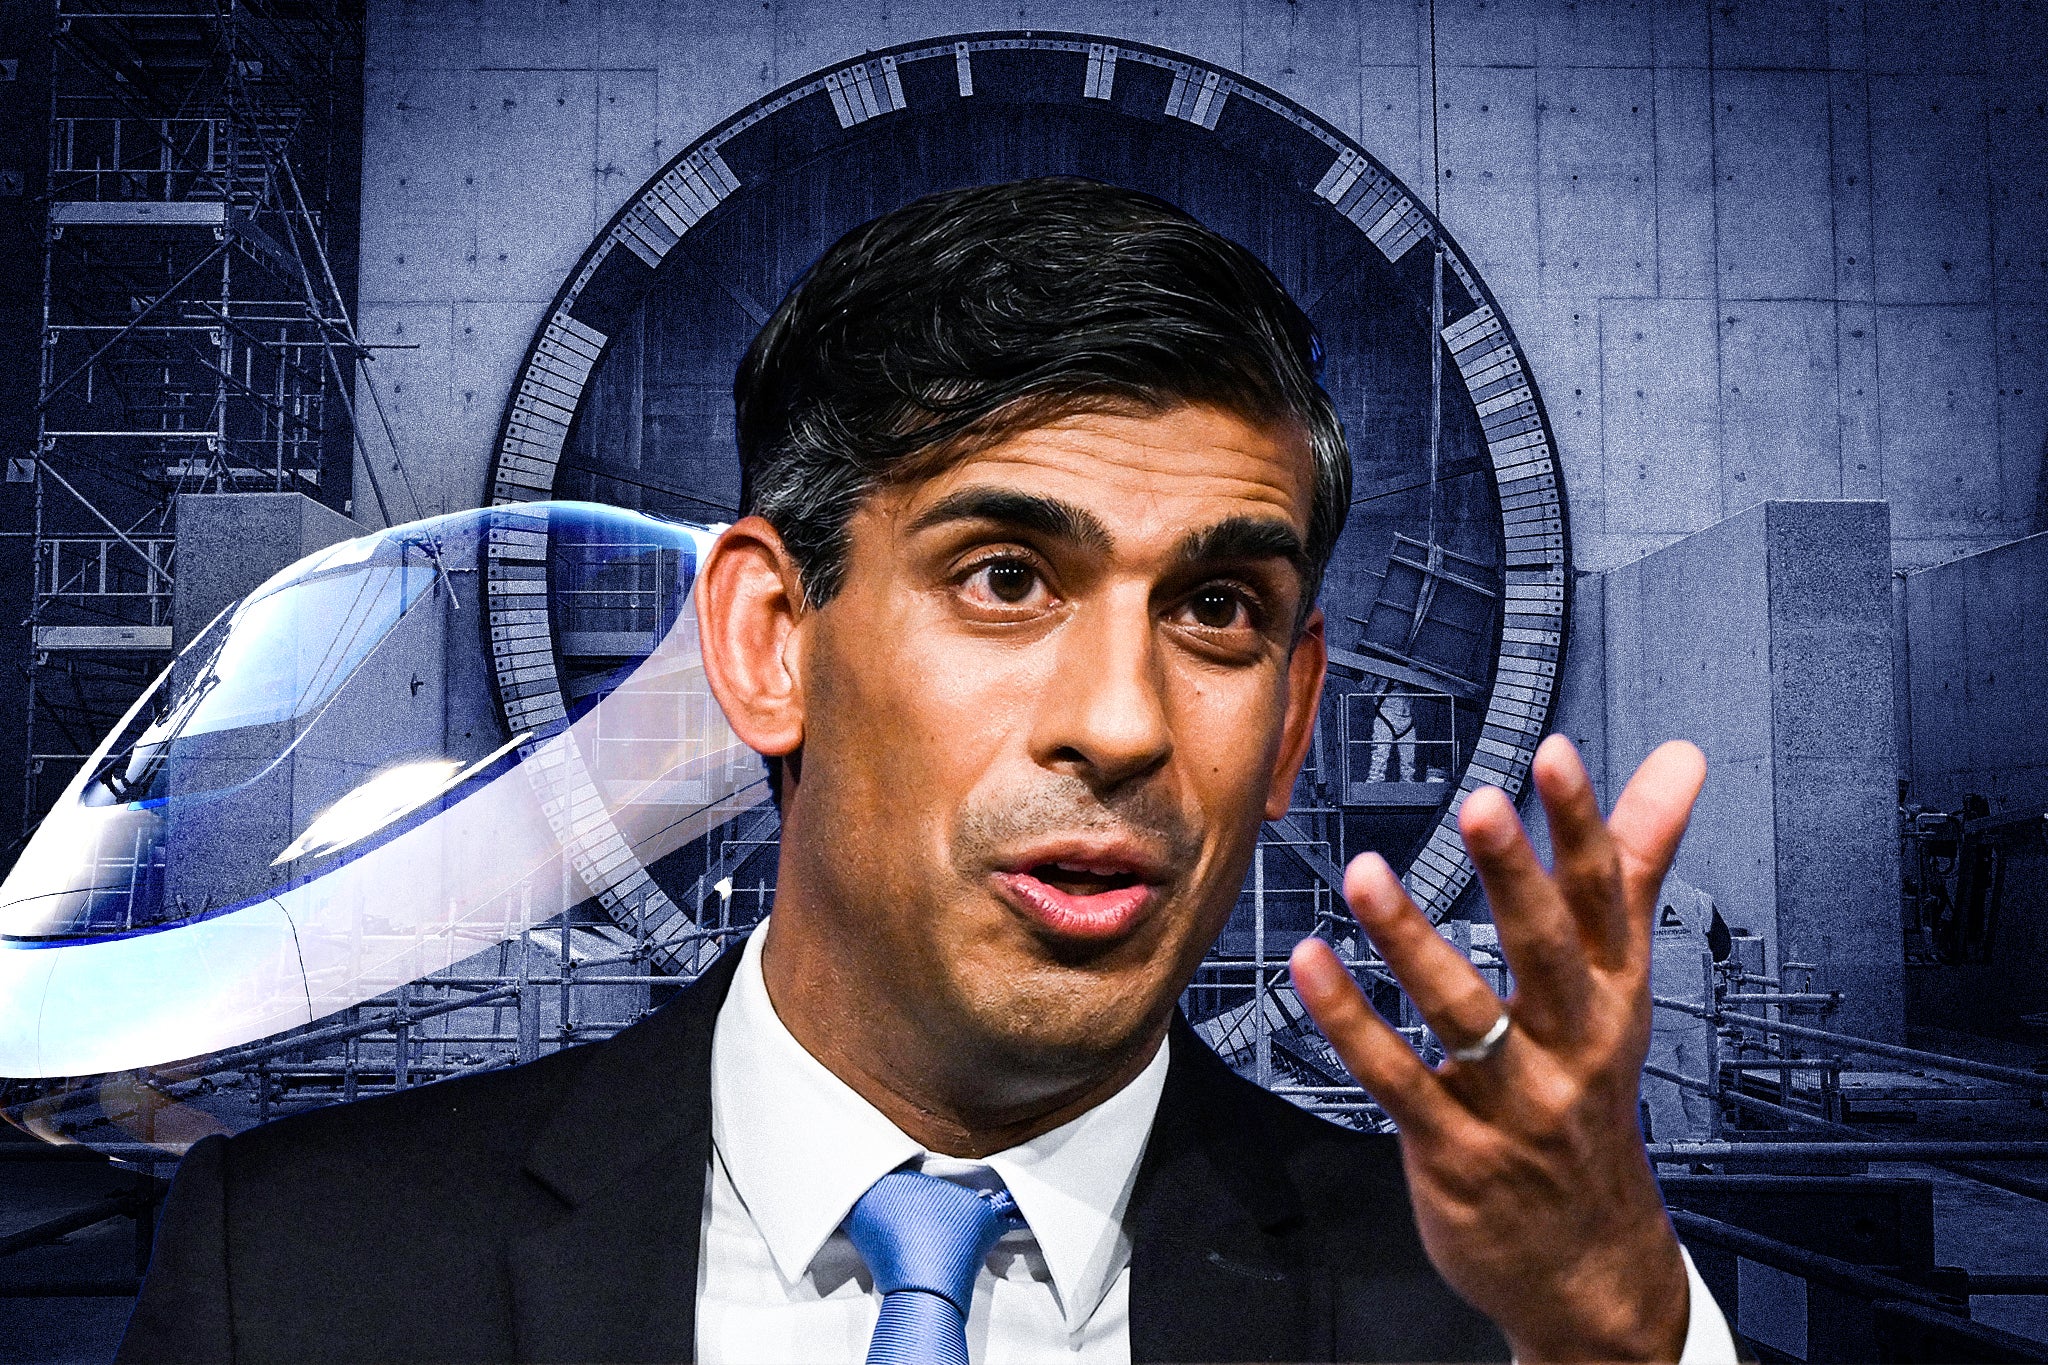 Rishi Sunak’s political expediency is being made at the expense of trust